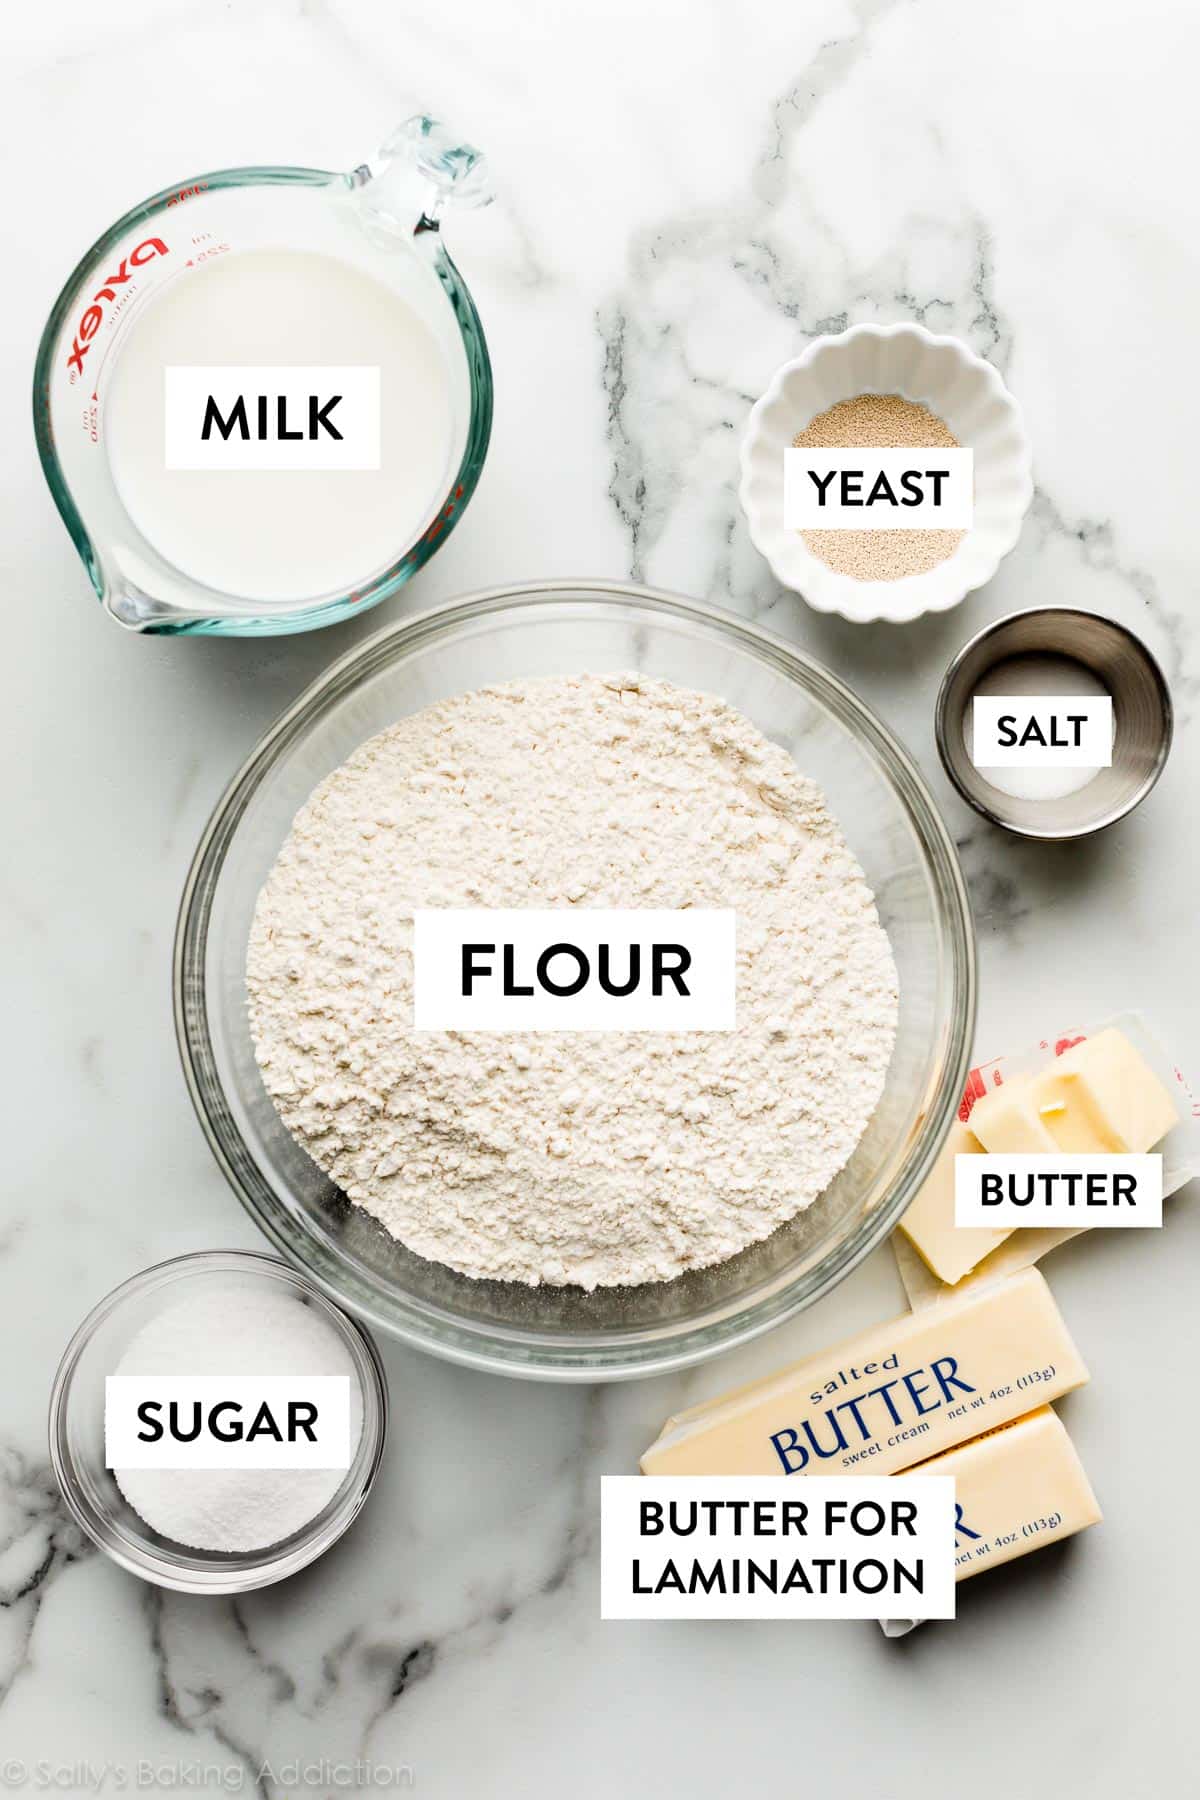 photo of individual ingredients including milk, yeast, salt, flour, butter, and sugar